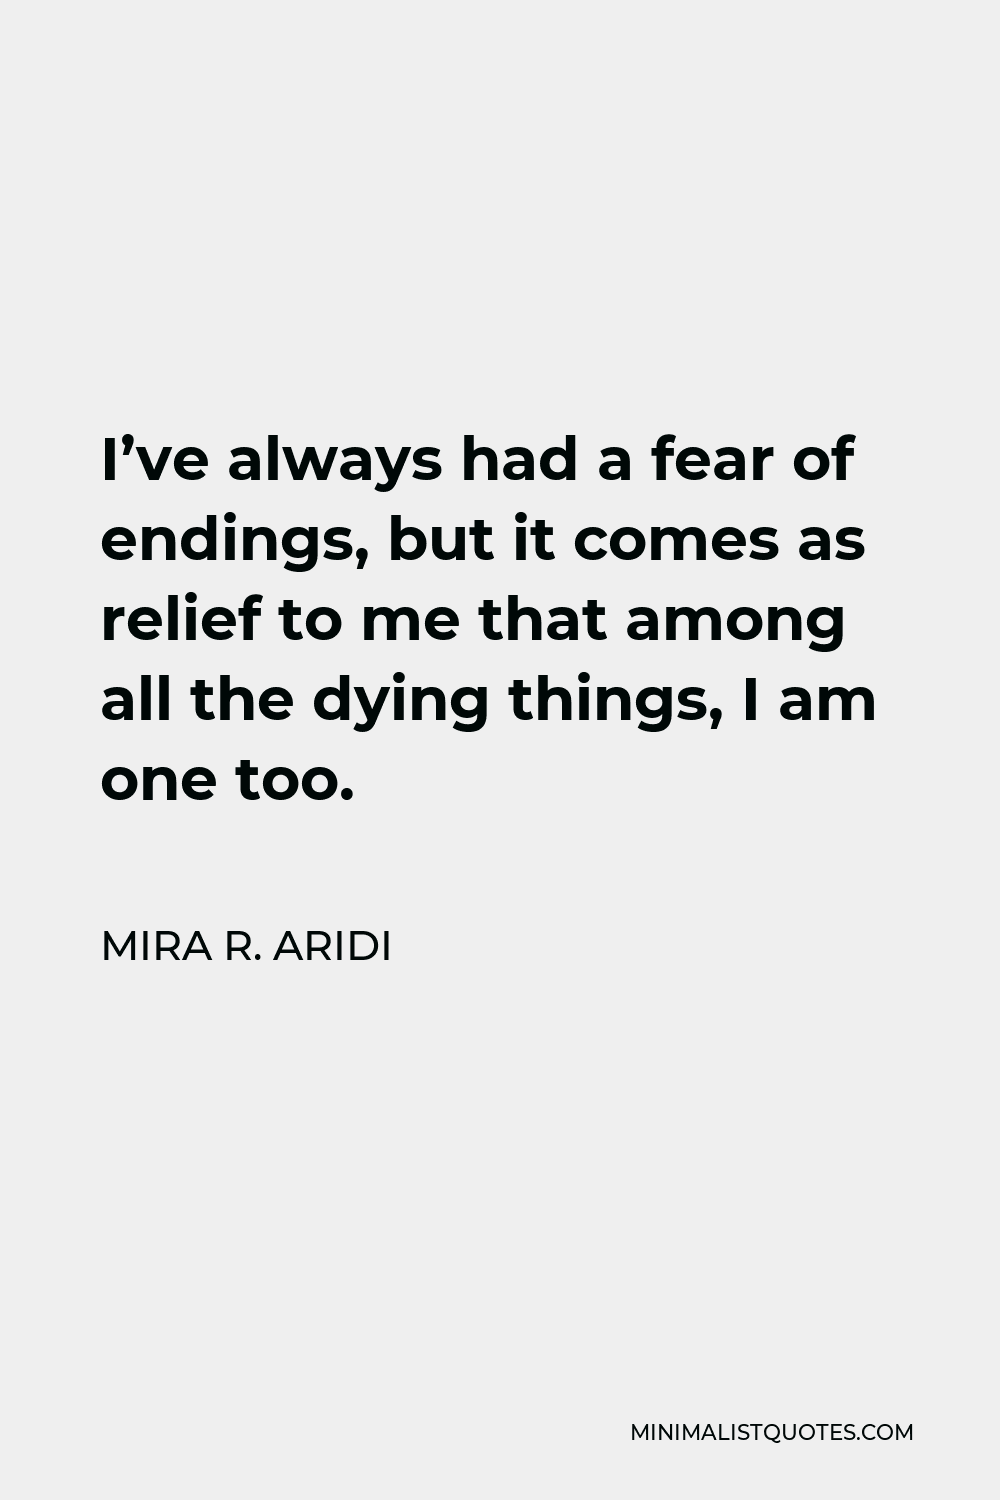 Mira R. Aridi Quote - I’ve always had a fear of endings, but it comes as relief to me that among all the dying things, I am one too.